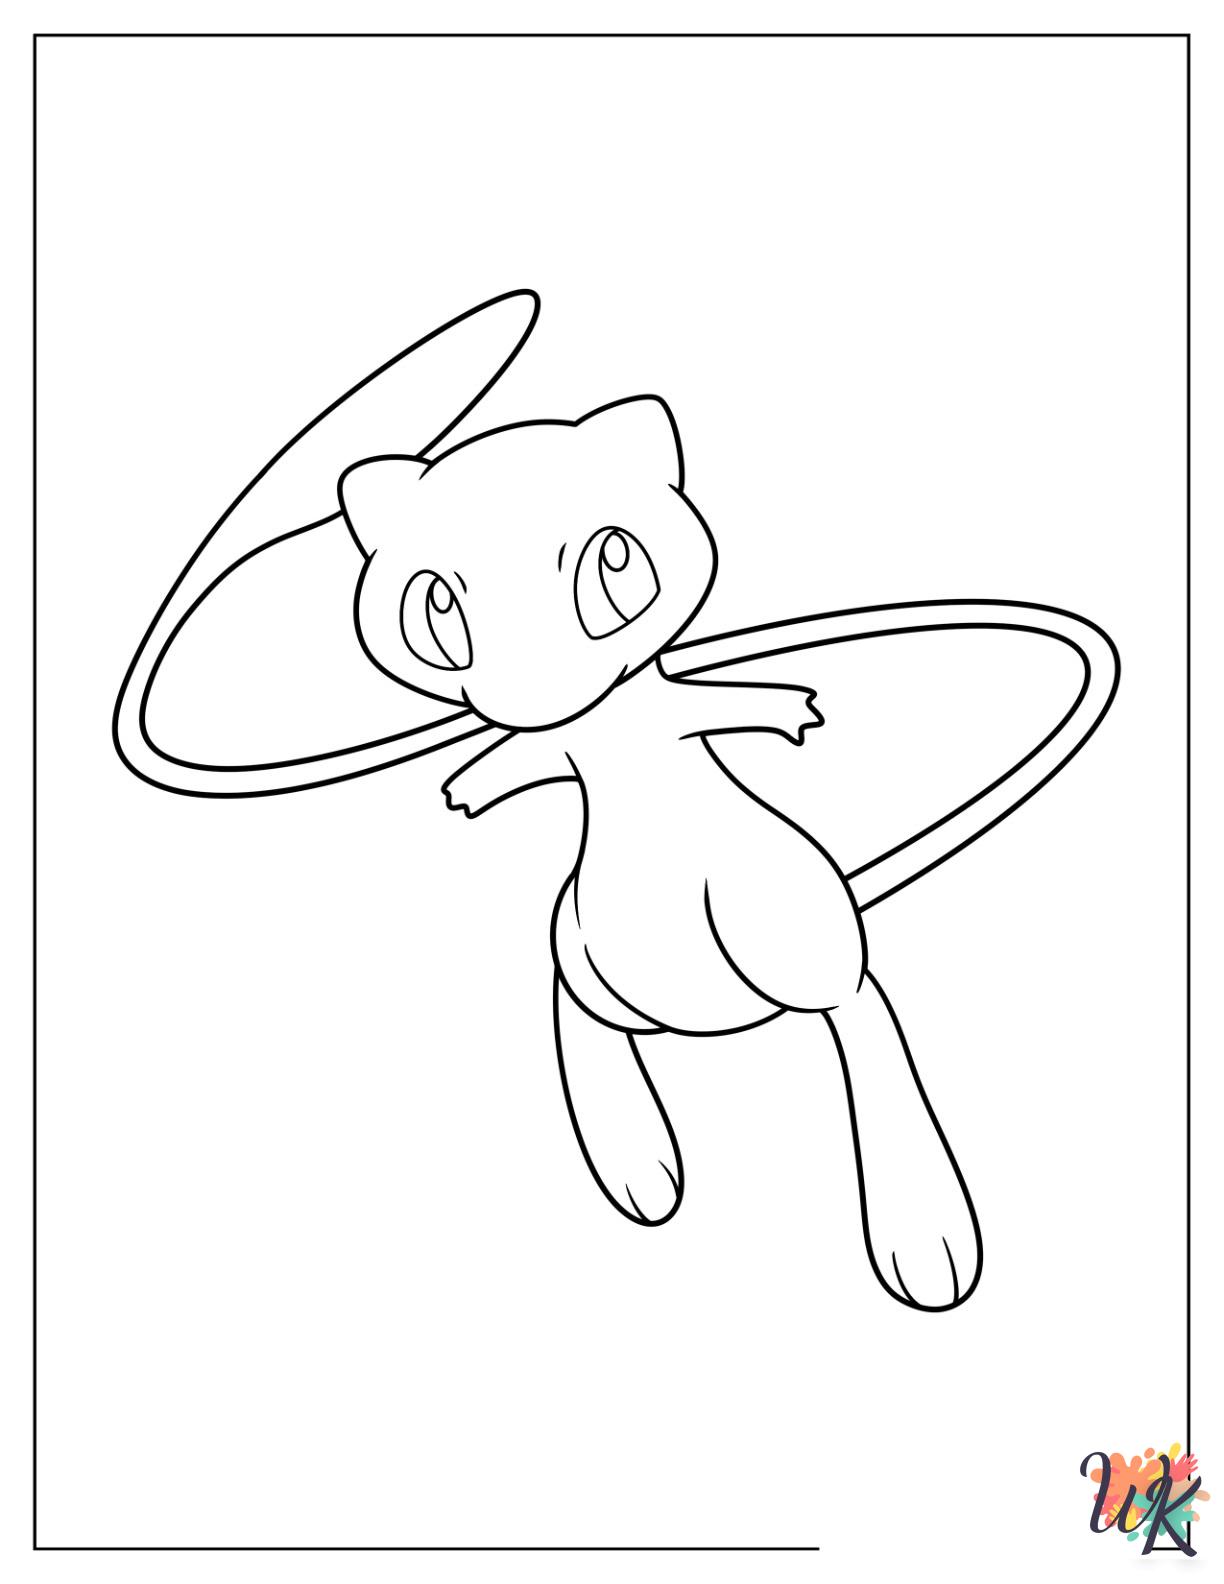 Mewtwo ornaments coloring pages